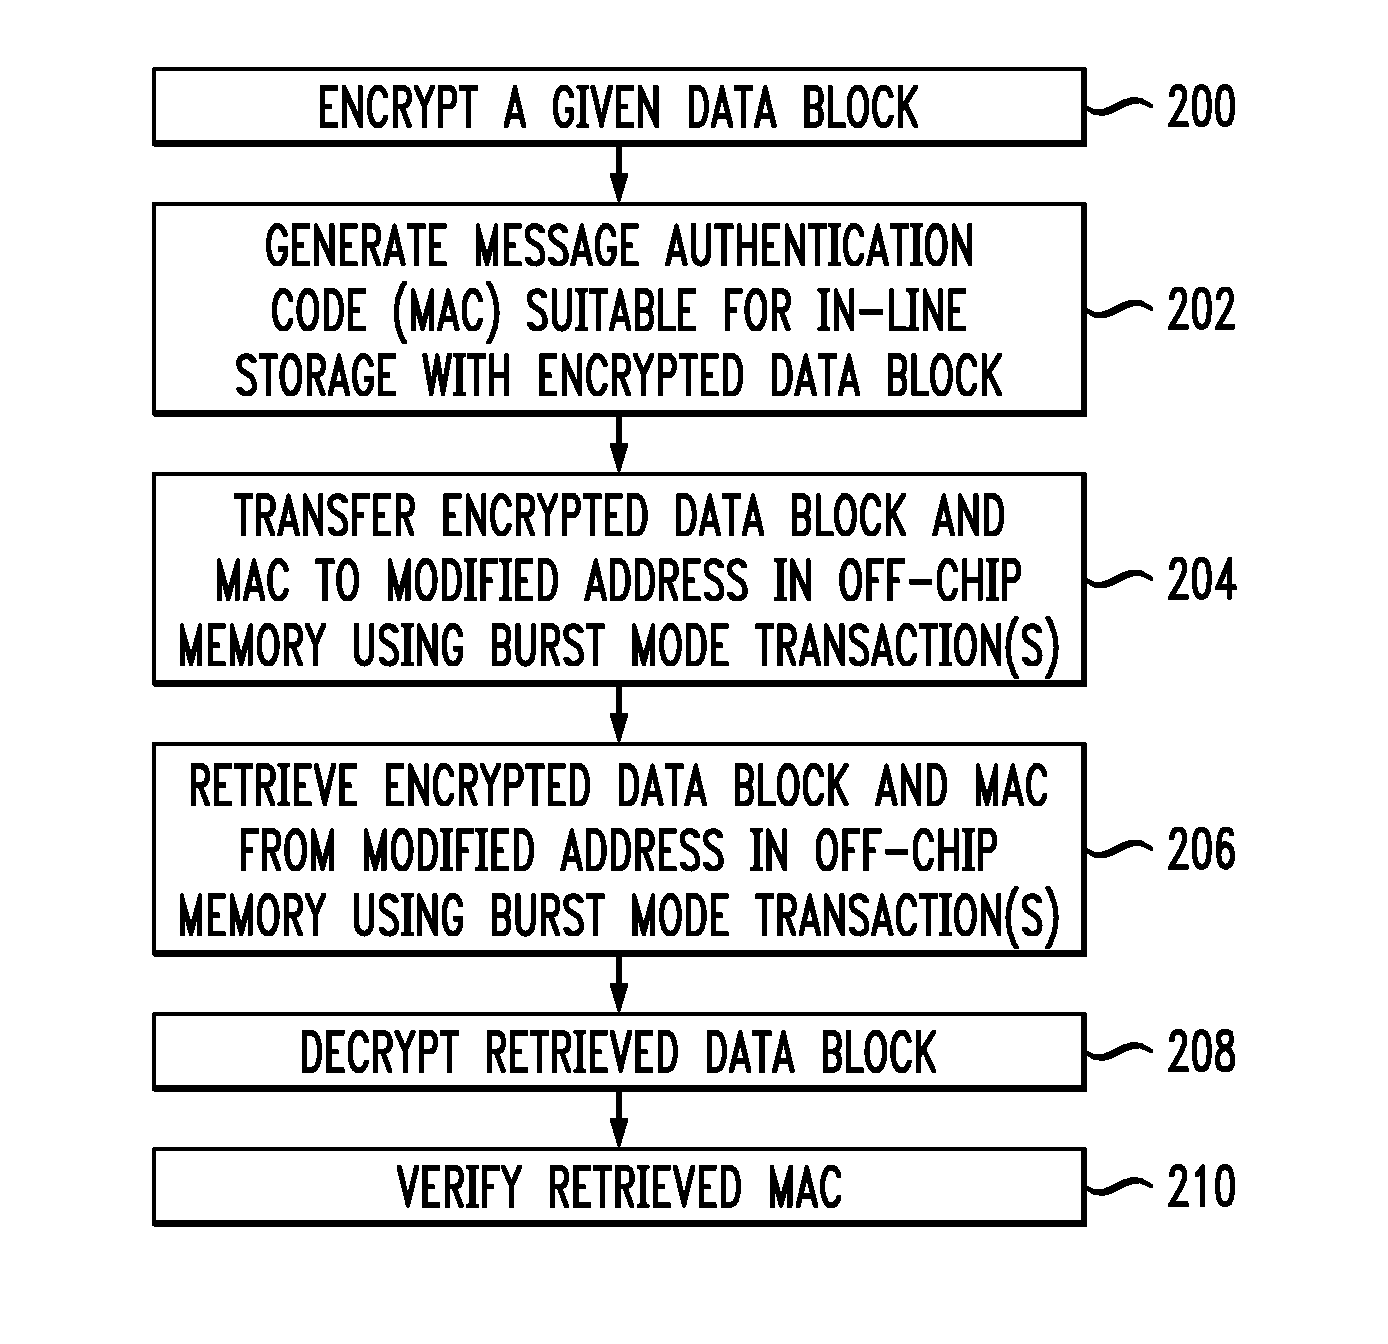 Storage and retrieval of encrypted data blocks with in-line message authentication codes